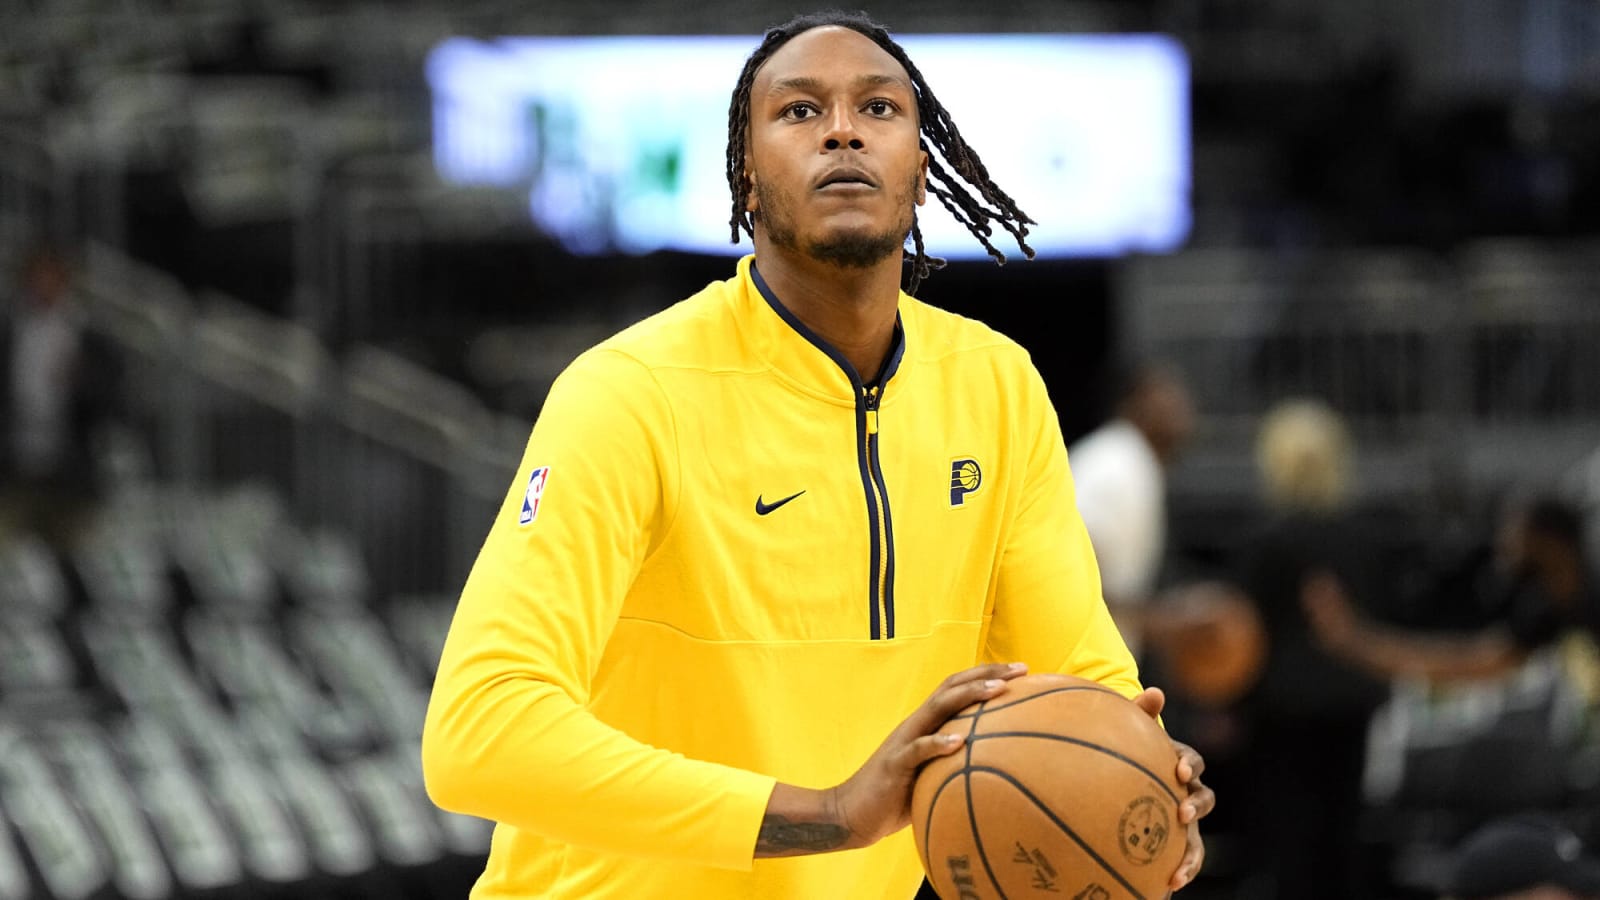 Myles Turner finally reaches conference semifinals after winding career with Indiana Pacers